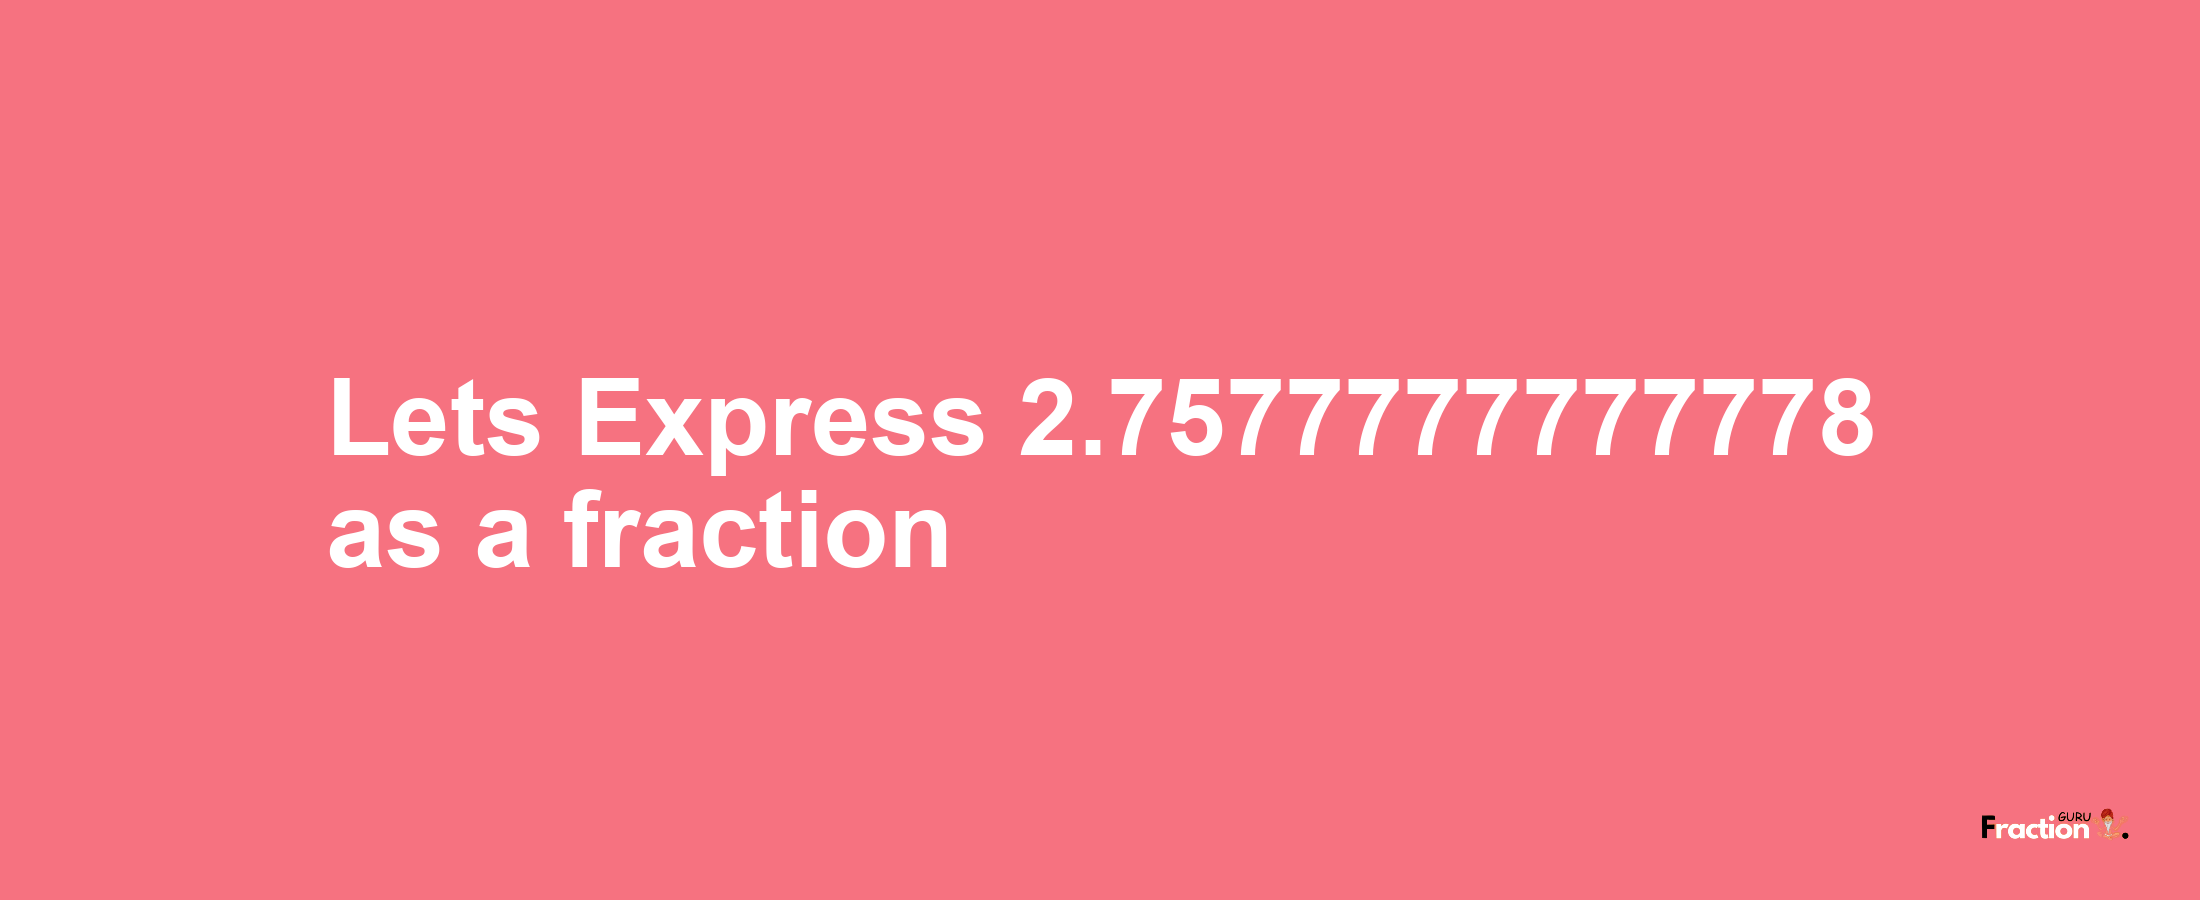 Lets Express 2.7577777777778 as afraction